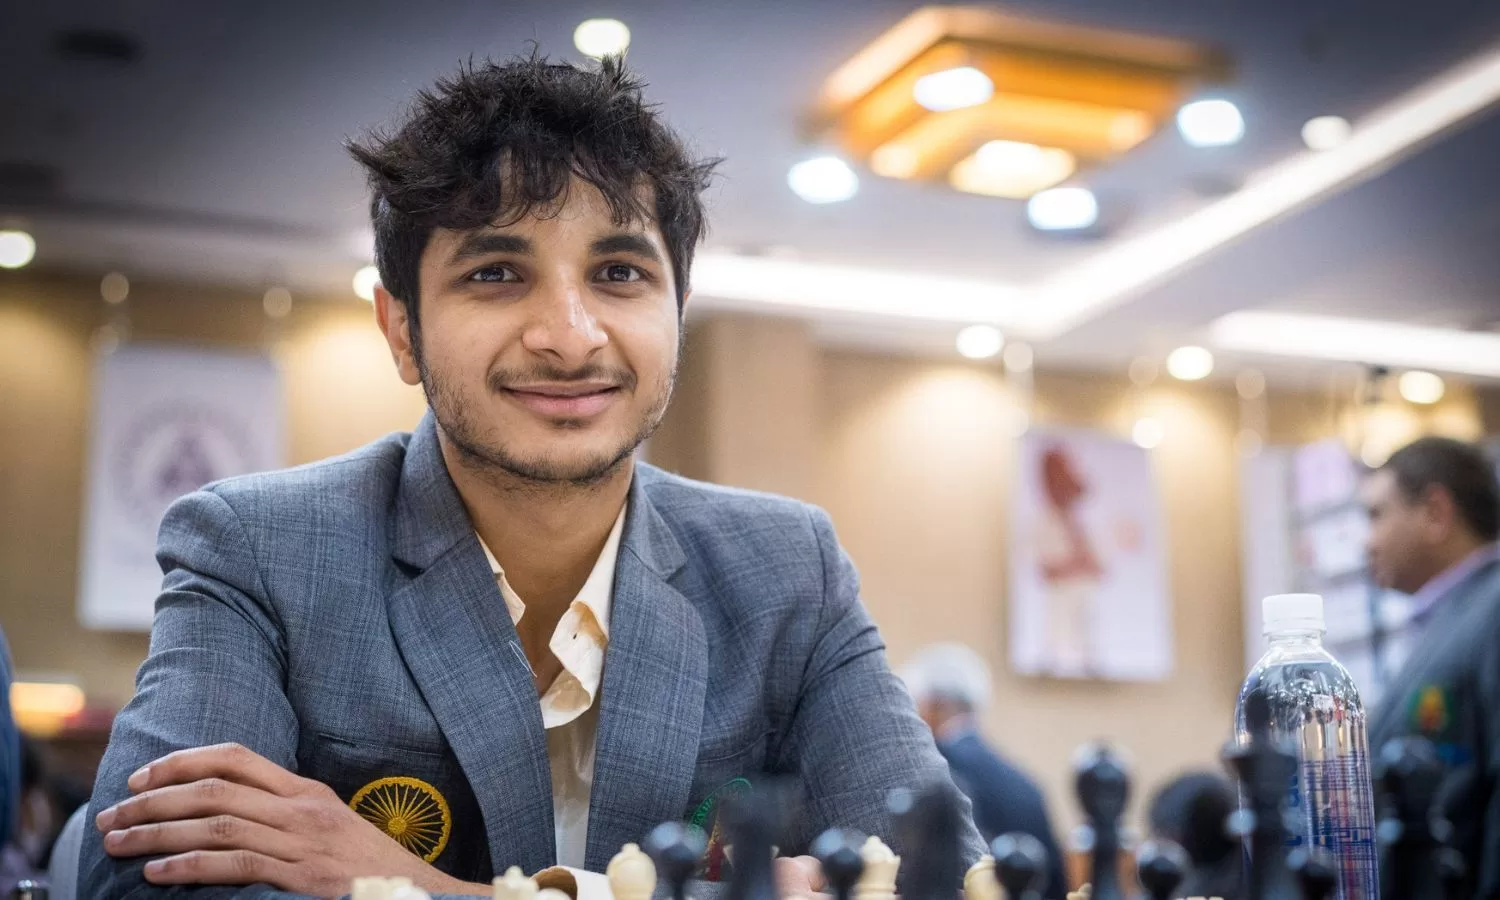 Gujrathi defeats Nakamura in 9th round, Gukesh remains joint topper